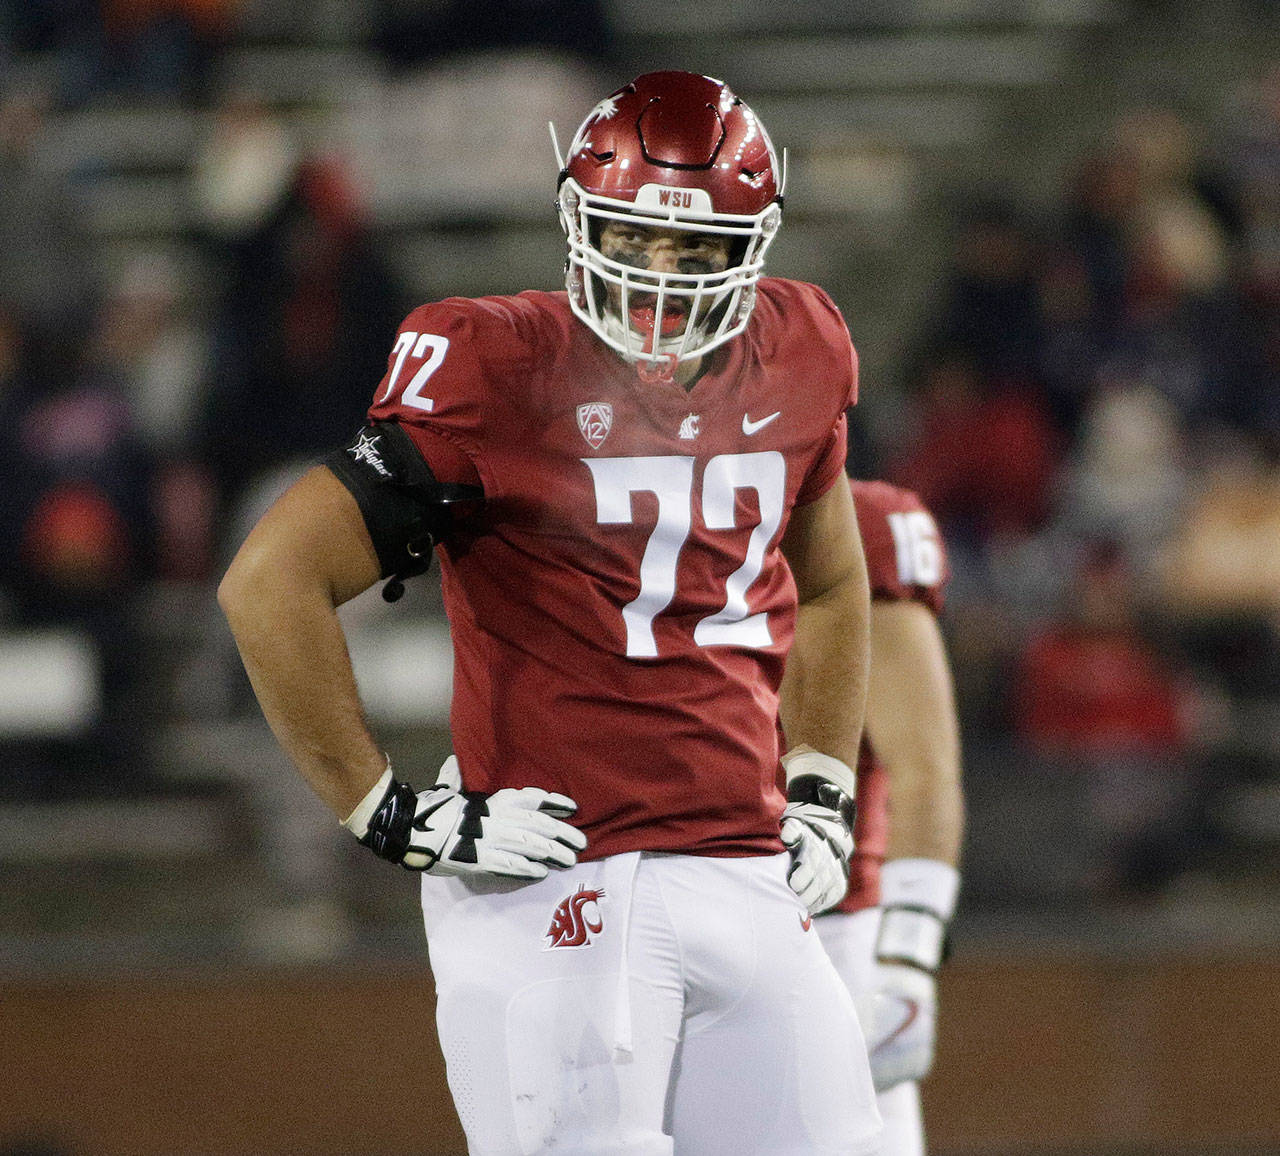 Abraham Lucas started all 13 games at right tackle for the Cougars last season as a freshman. (AP Photo/Young Kwak)